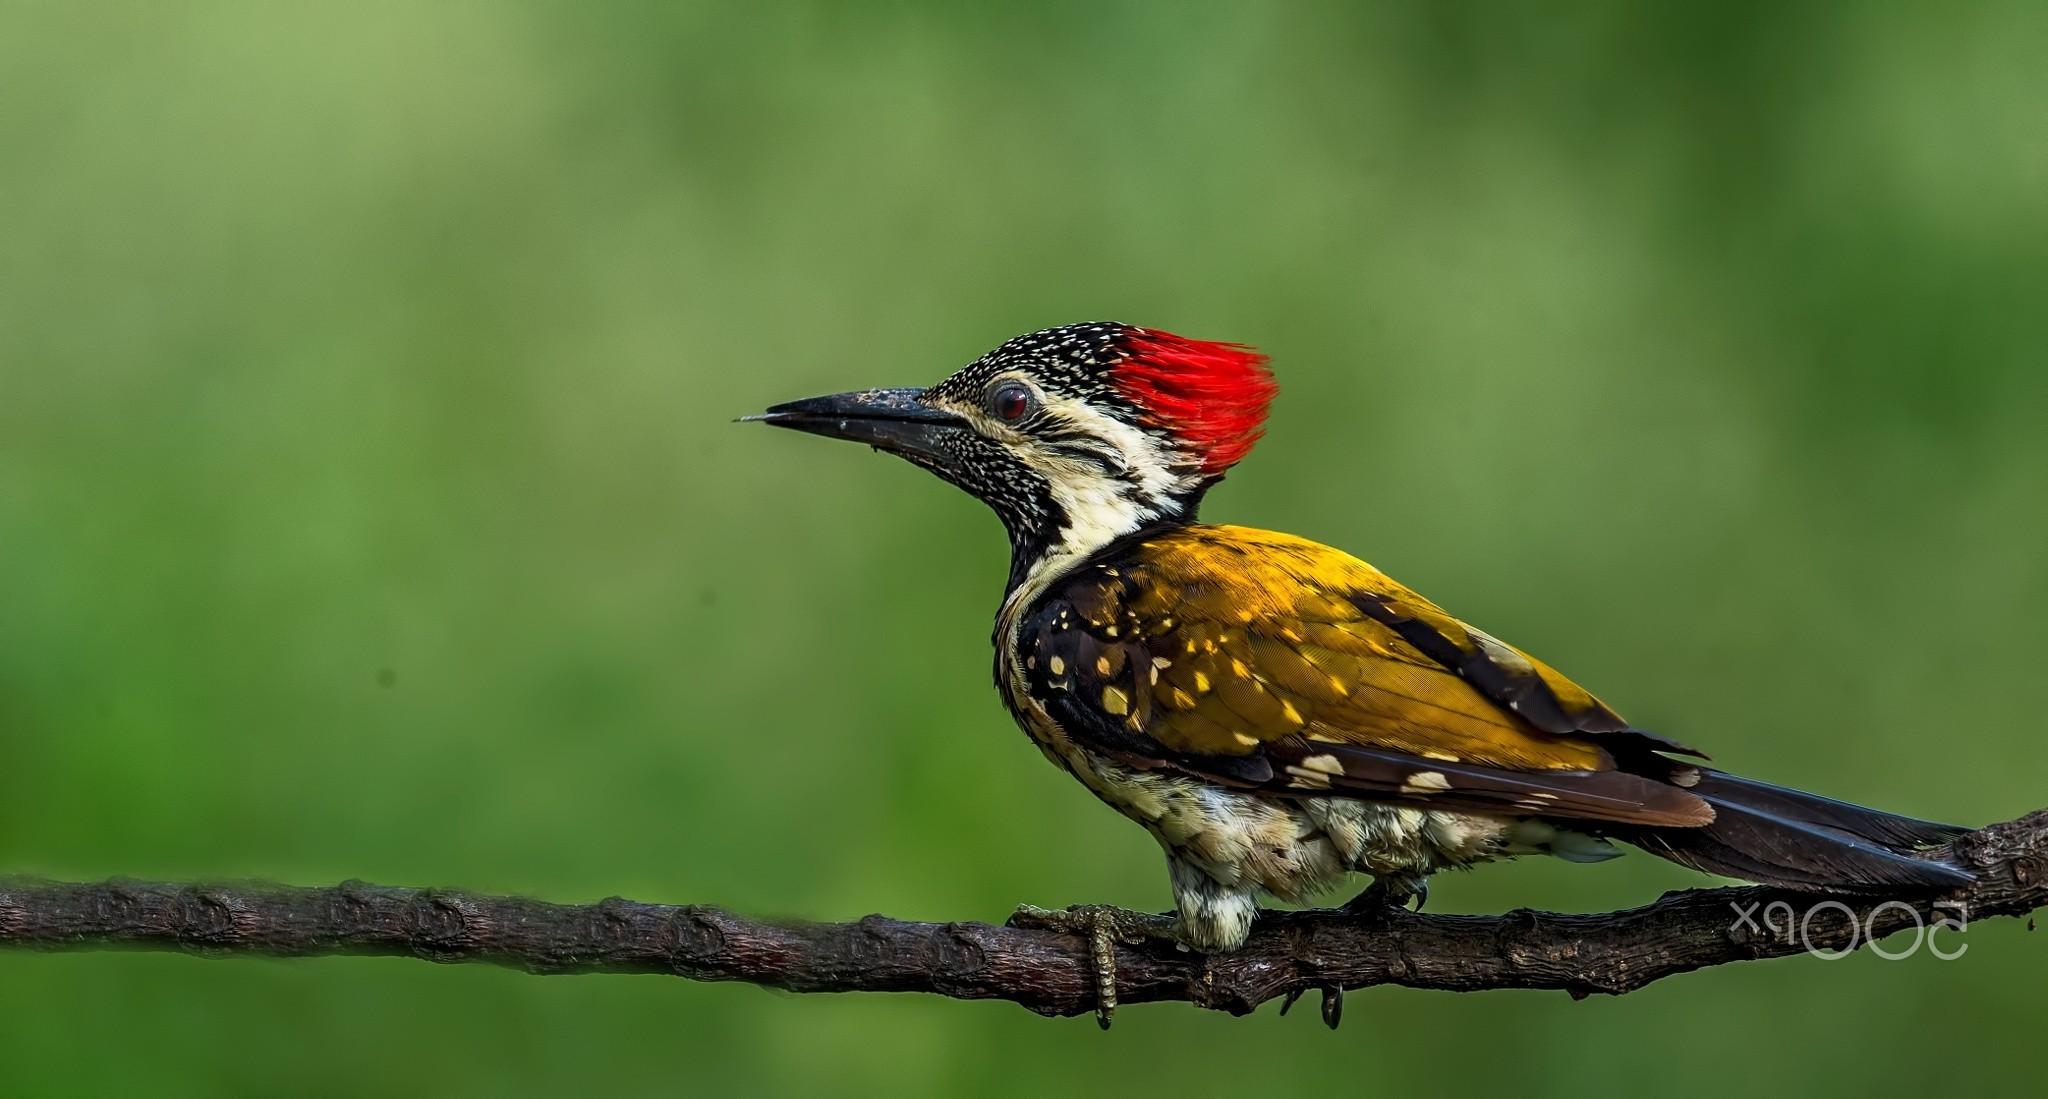 Woodpecker Wallpaper background picture